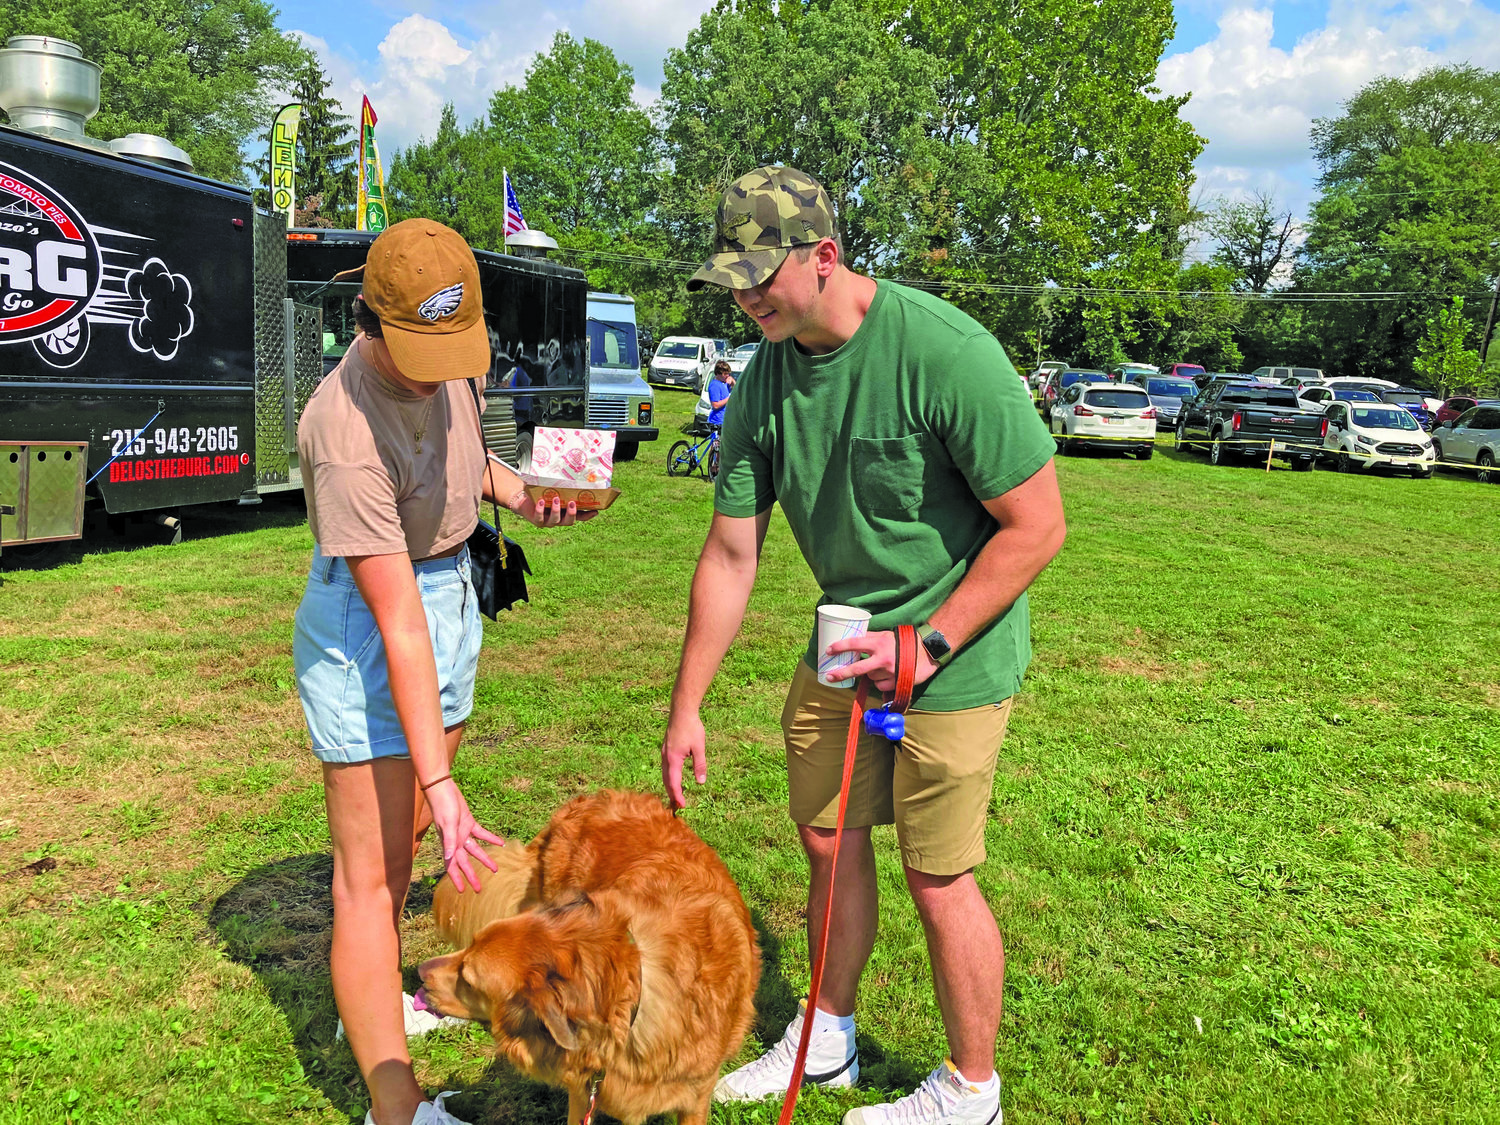 Cassie Baner, left, and Matt Raczak enjoy some food and drink and their golden retriever Finn during Harvest Day in Yardley Borough.